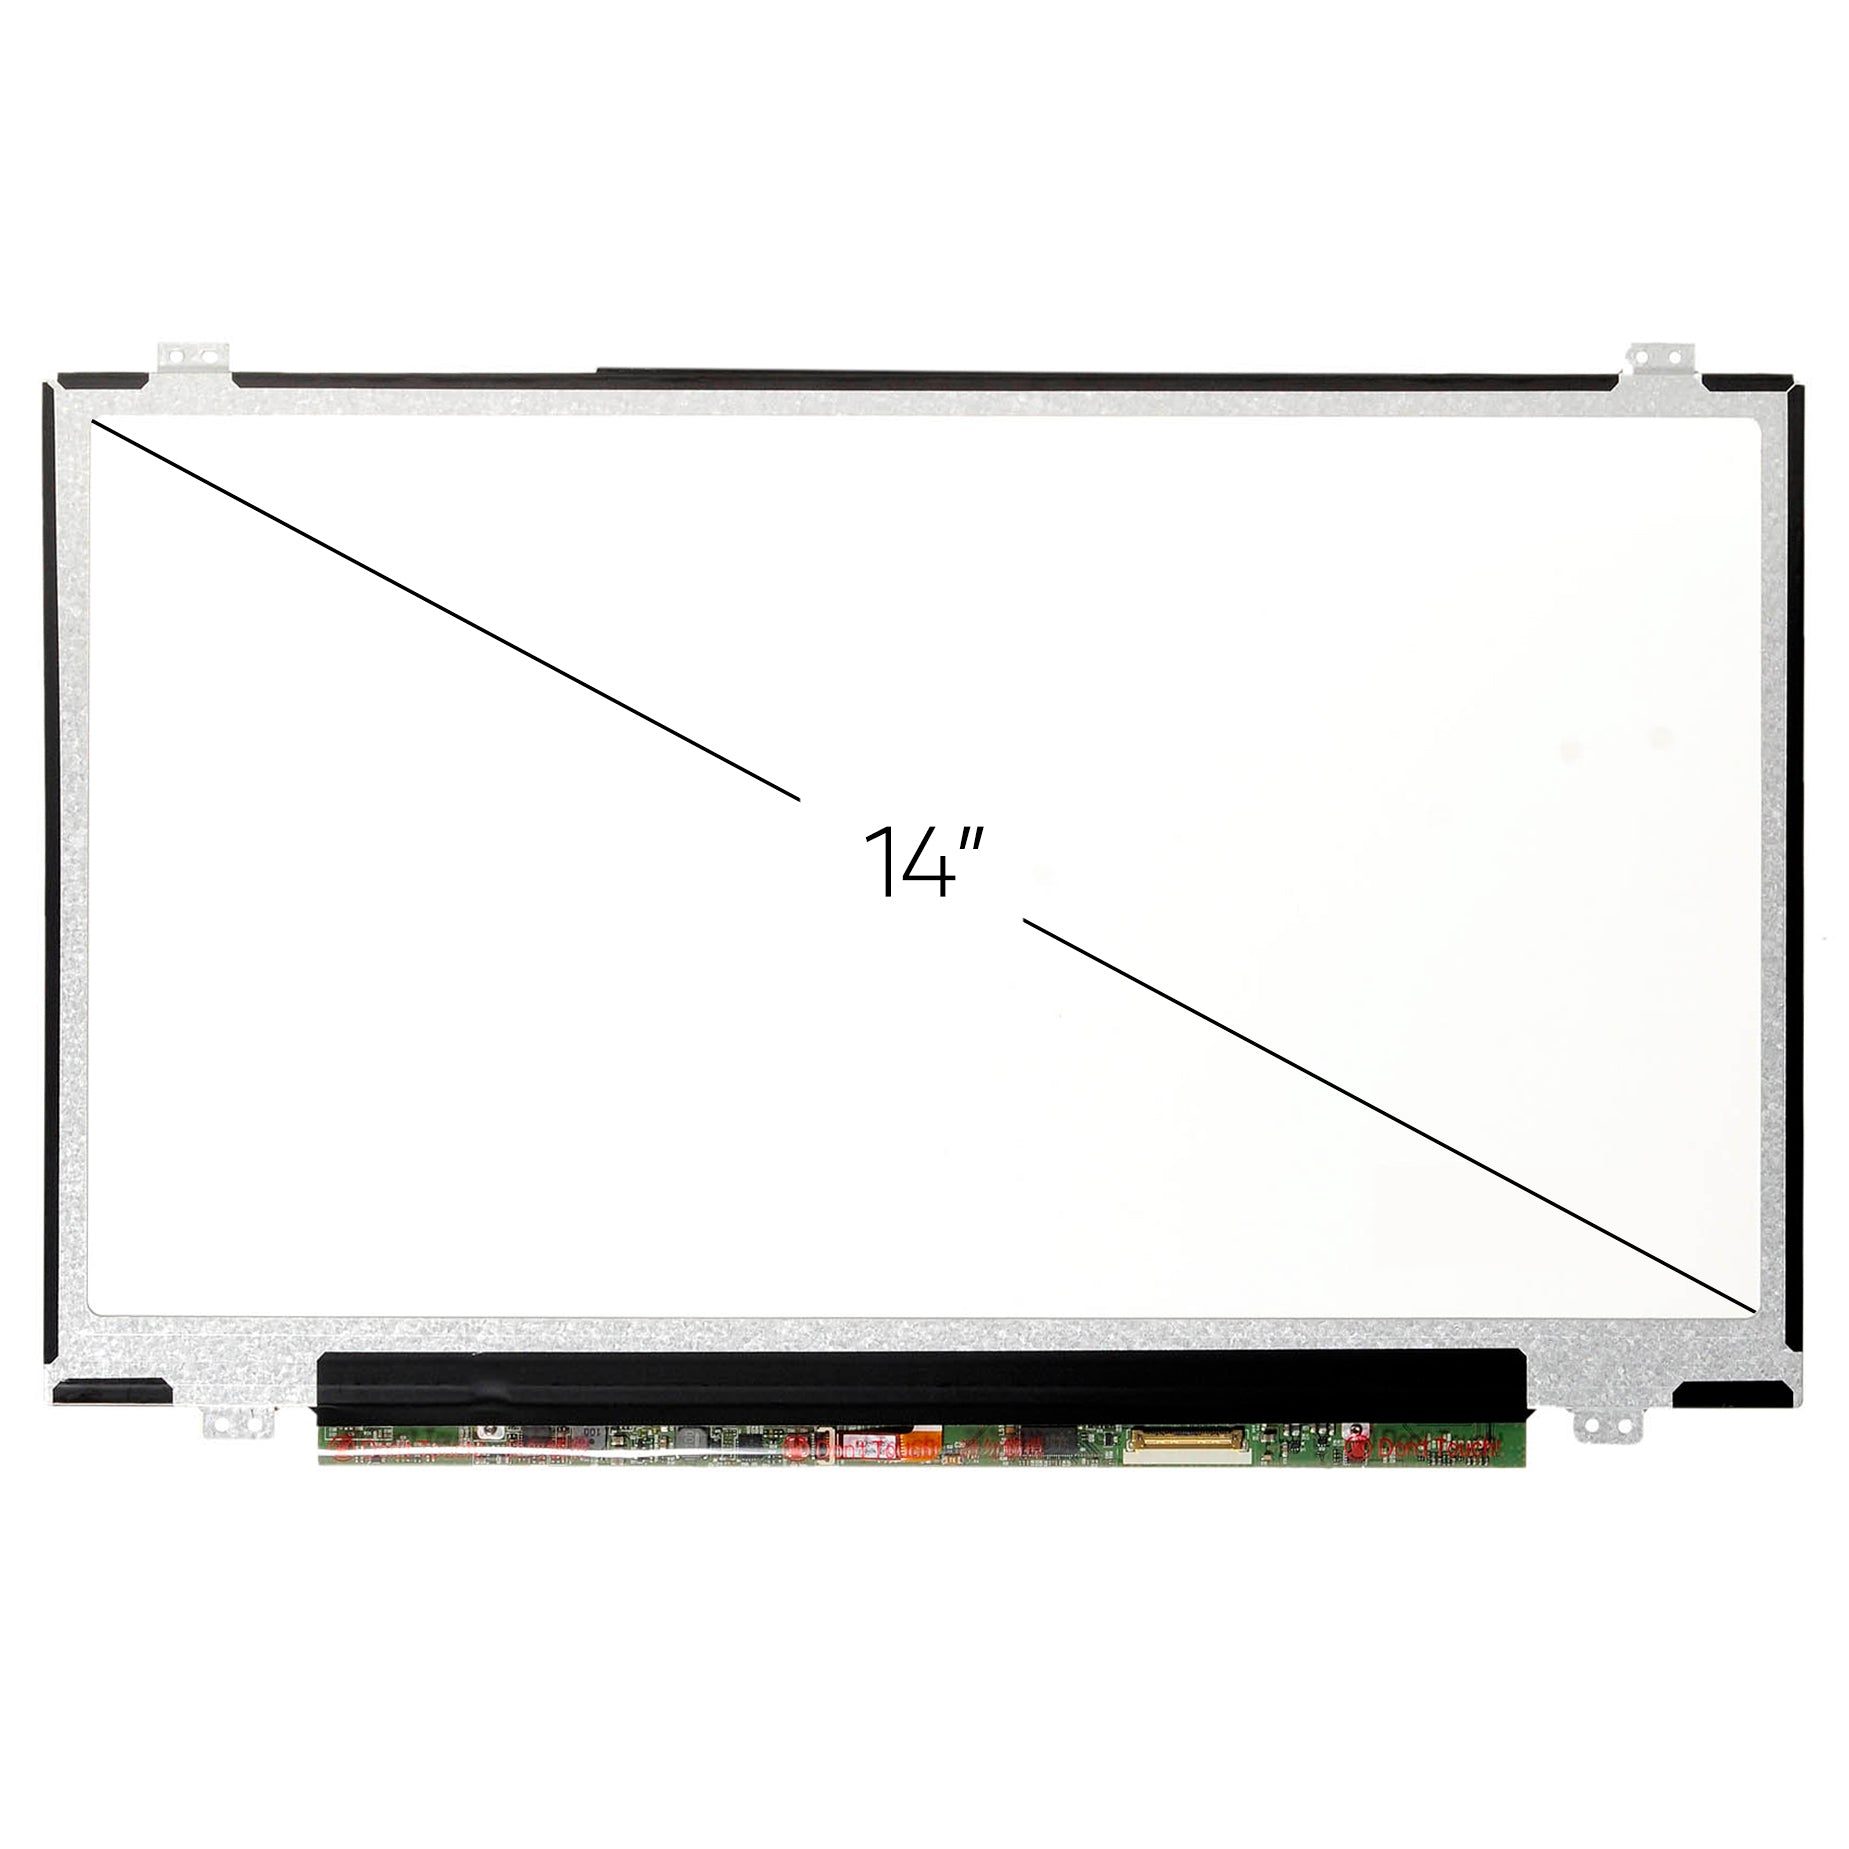 Screen Replacement for LTN140HL02-D01 FHD 1920x1080 IPS Matte LCD LED Display